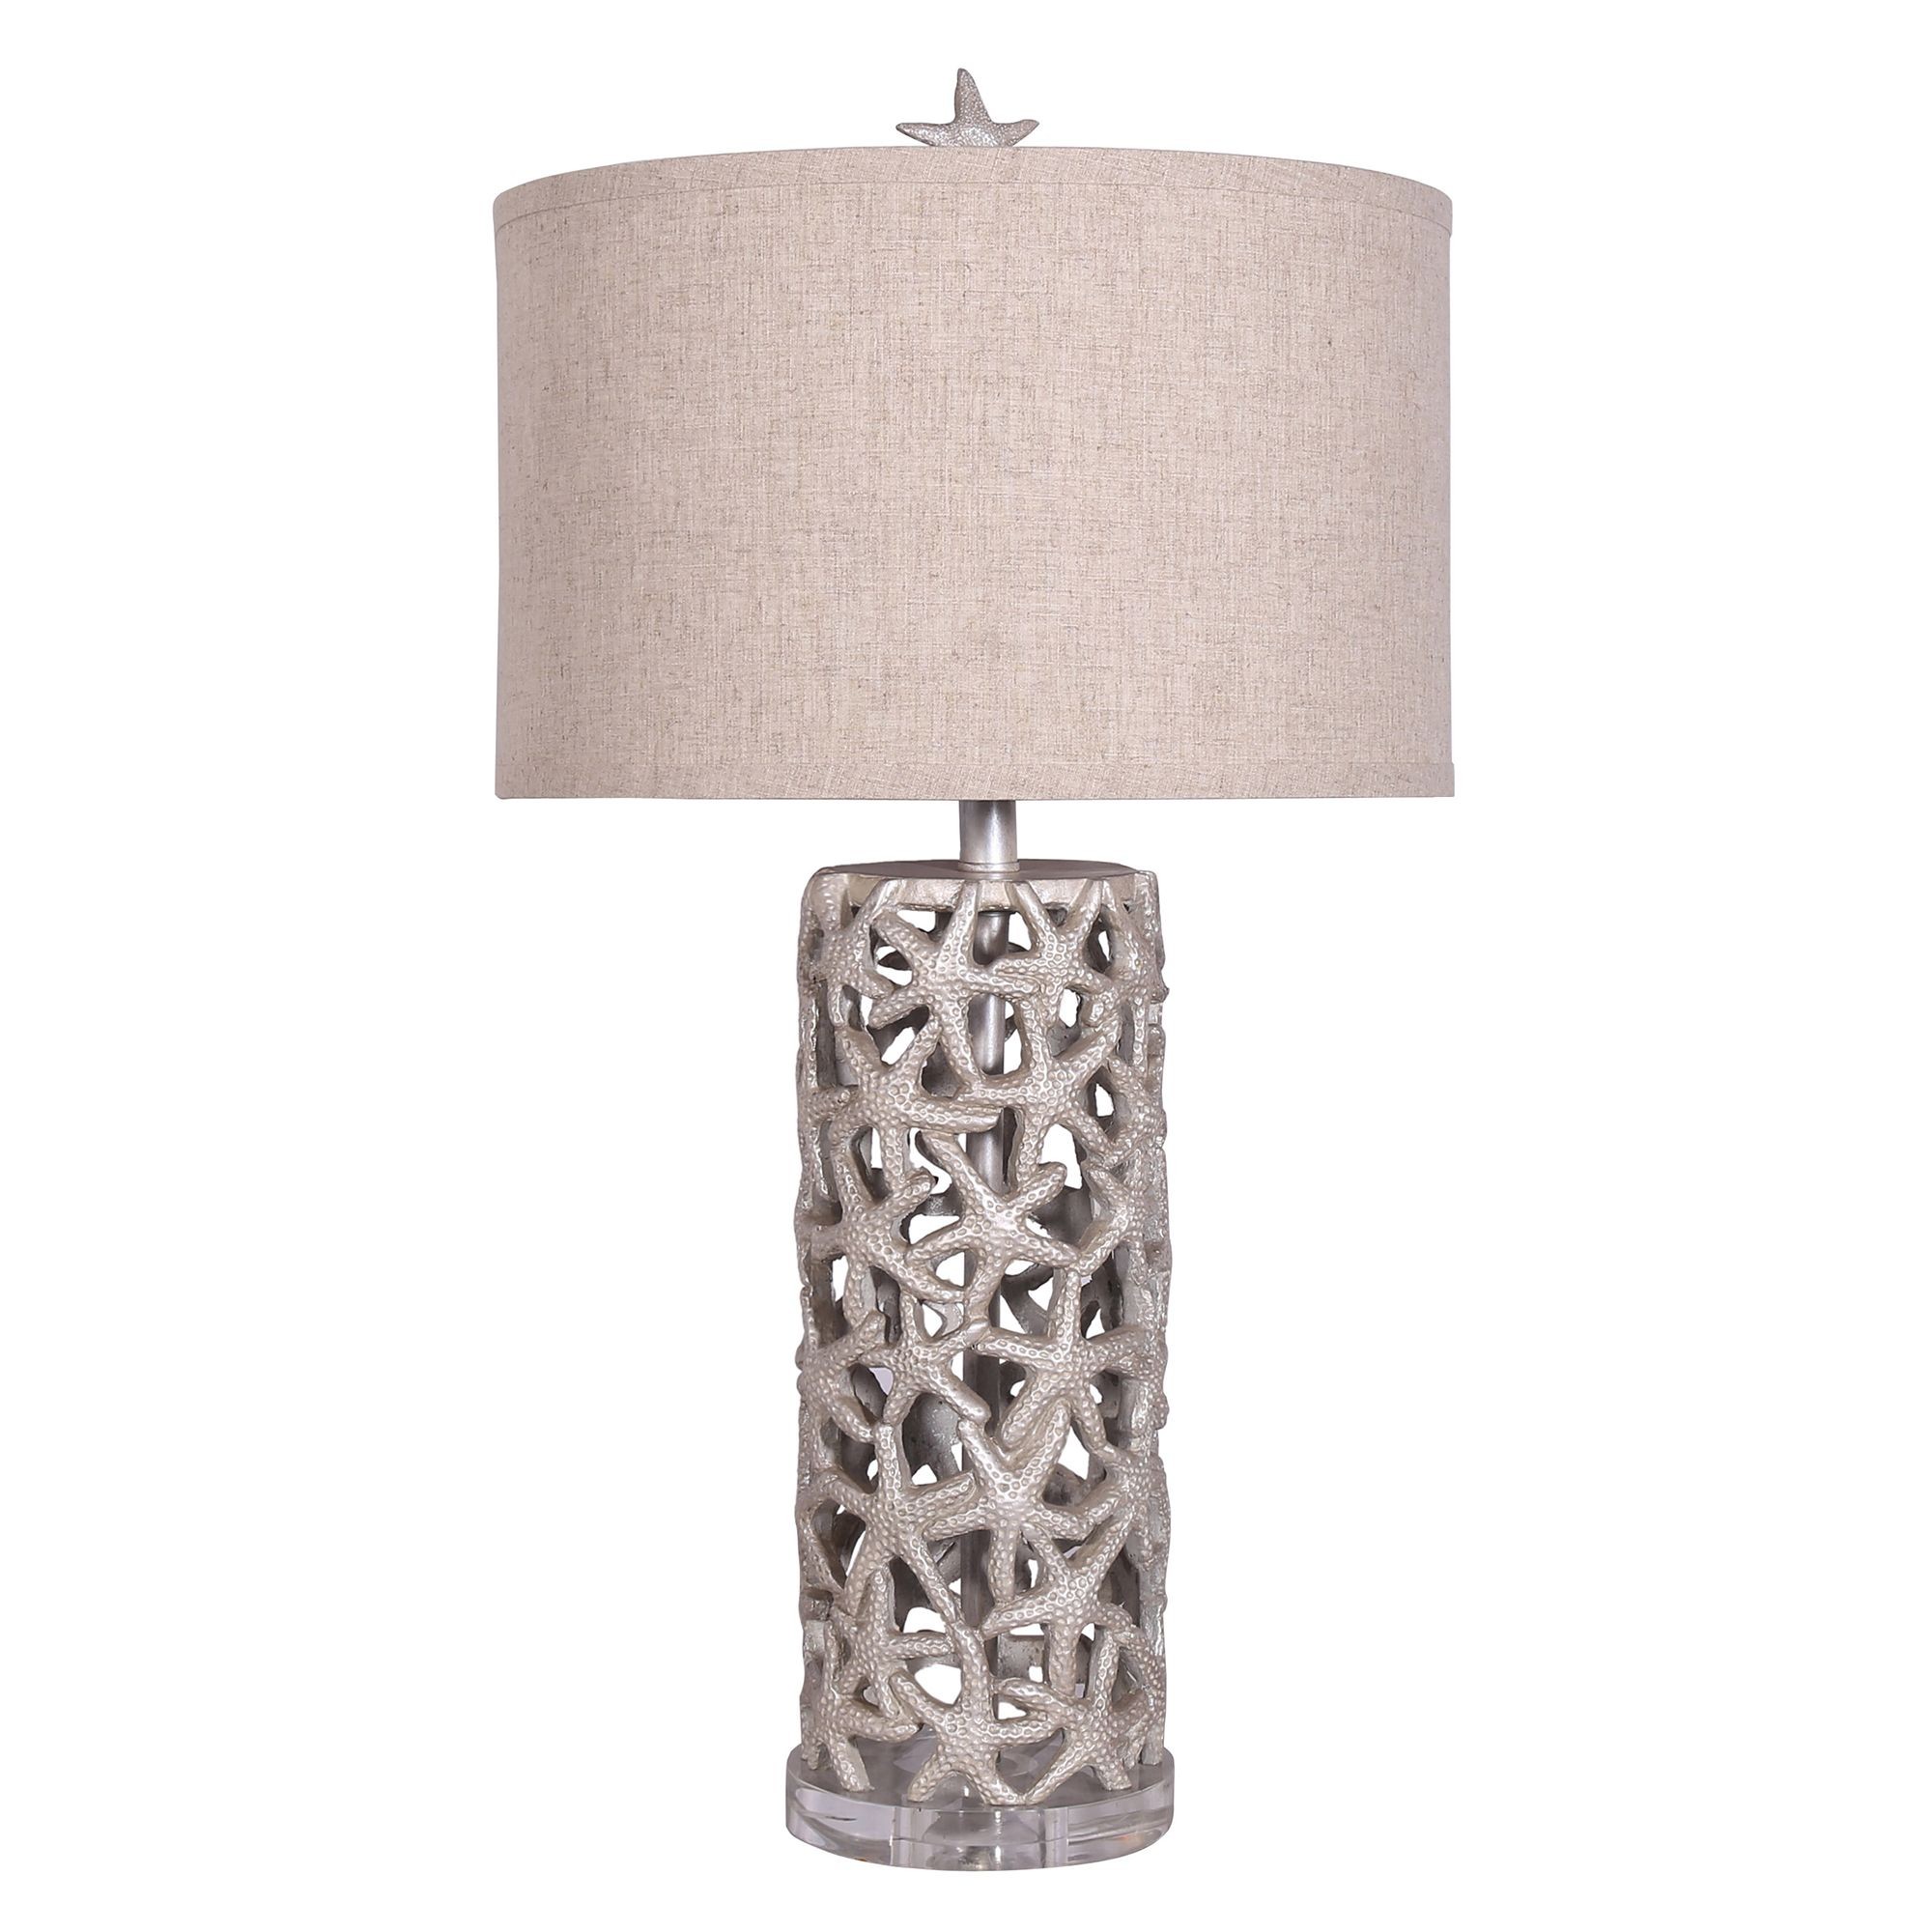 Set of 2 Beige Starfish Network Table Lamps